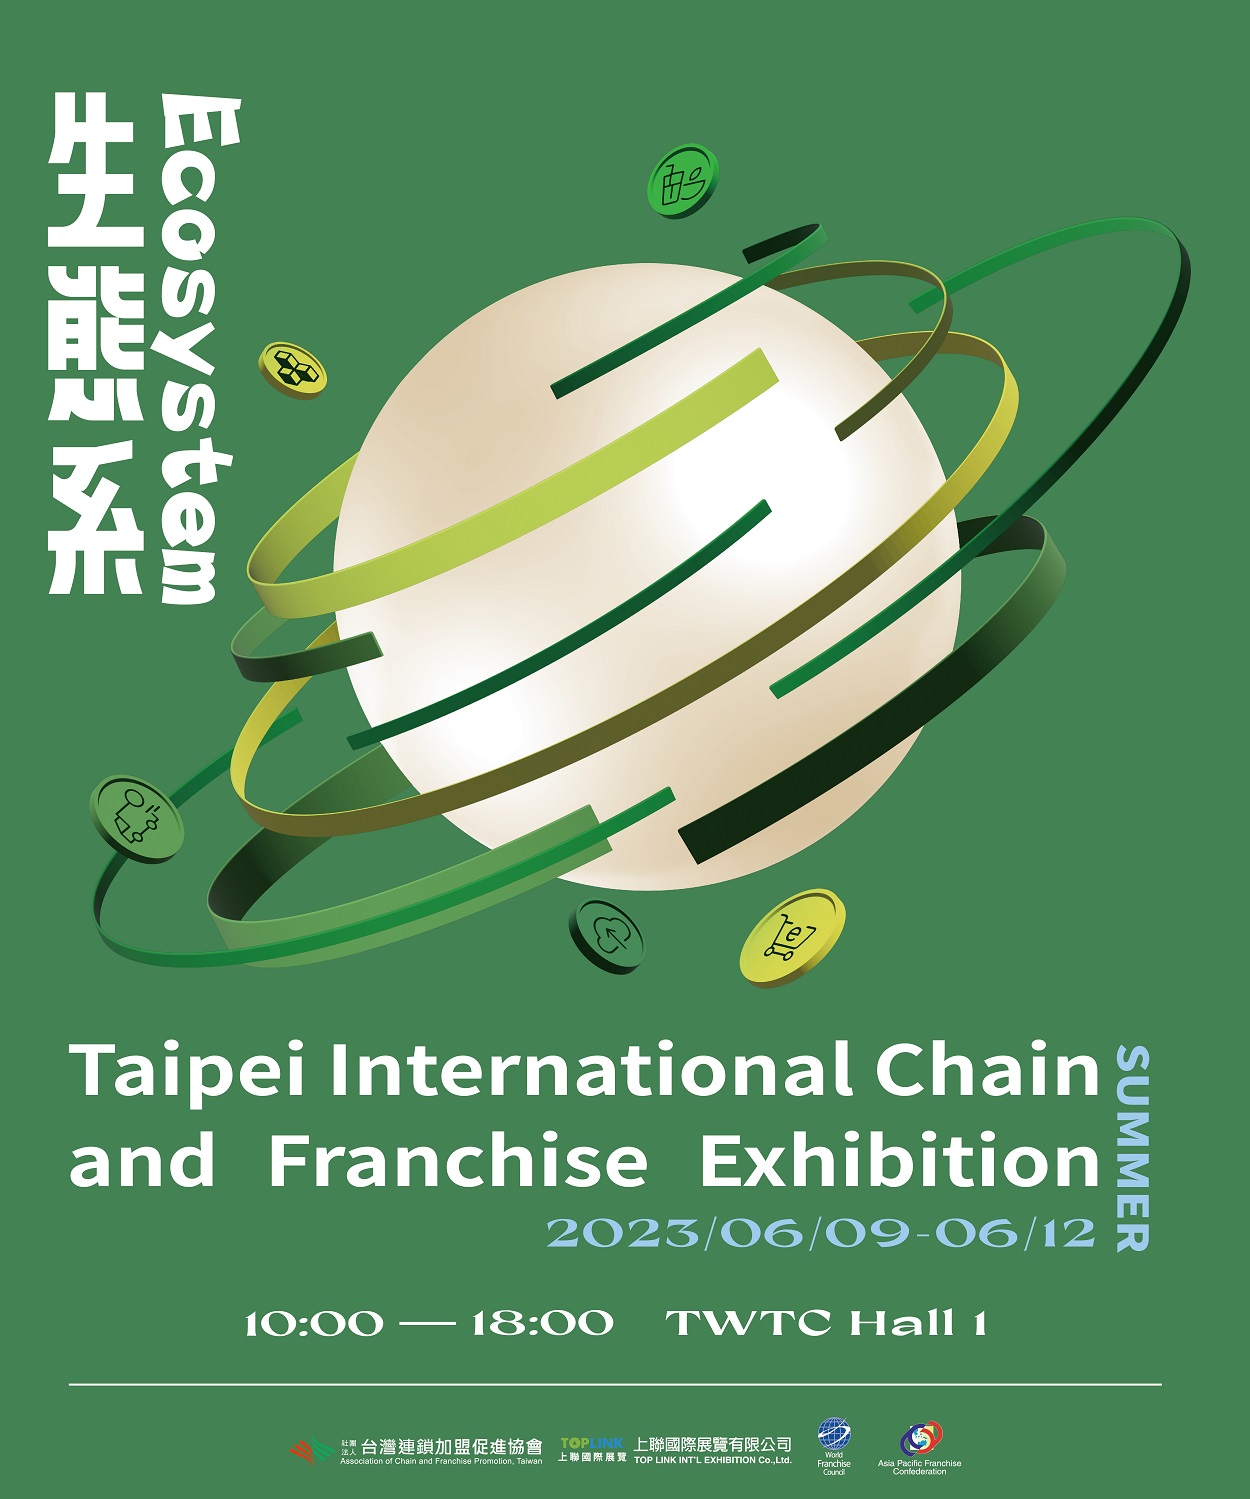 Association of Chain and Franchise Promotion, Taiwan (ACFPT)